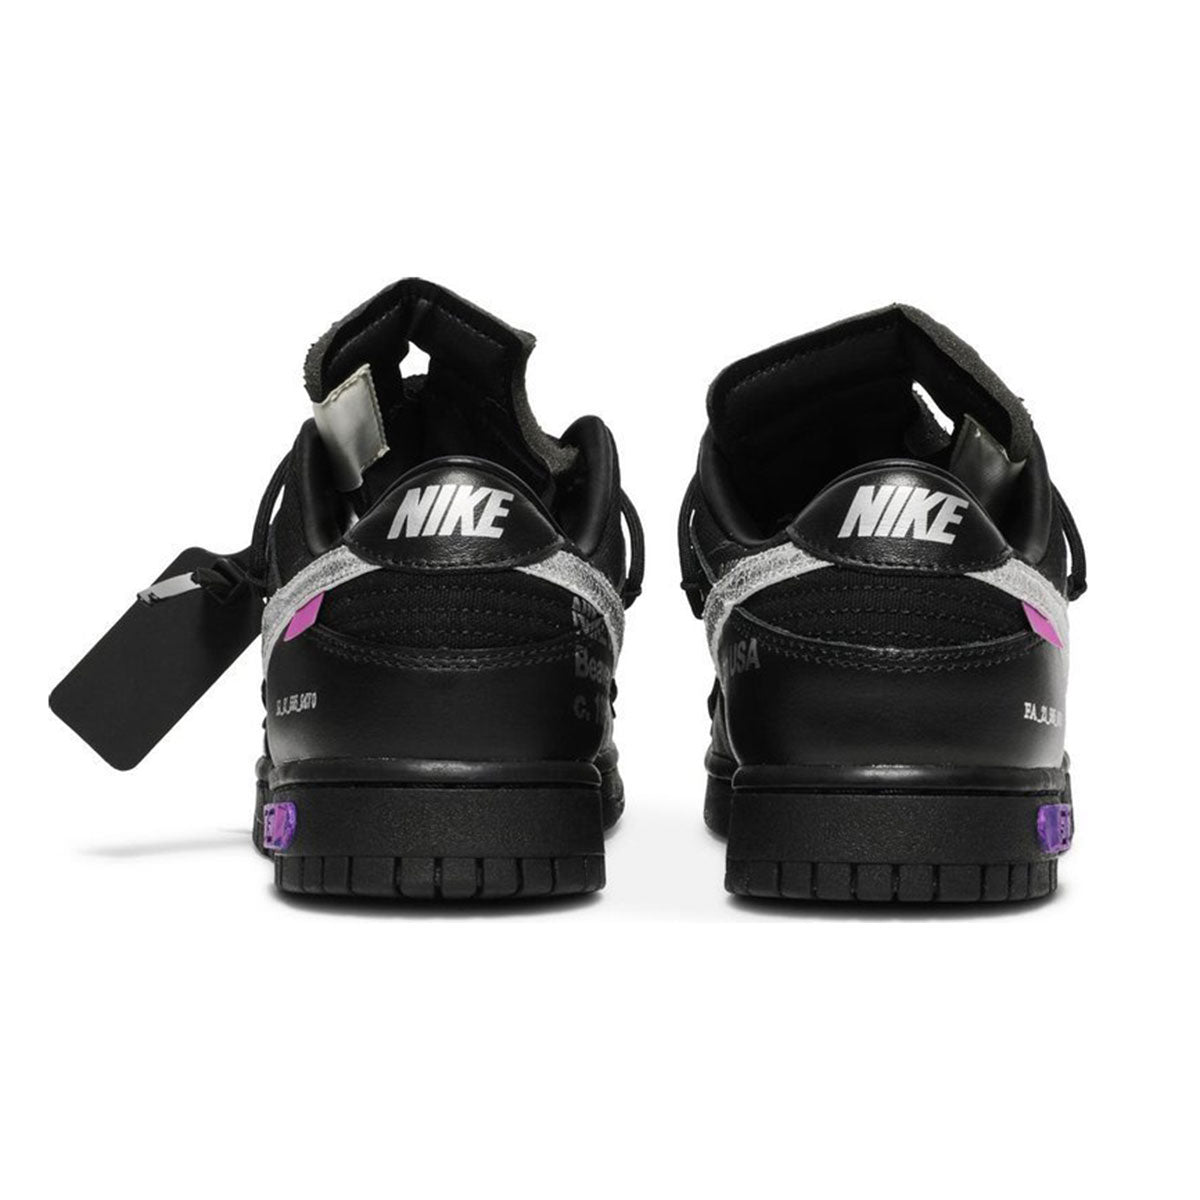 [27.0cm] Off-White × Nike Dunk Low “1 OF 50 Black 50” Off-White × Nike Dunk Low “1 OF 50 Black 50” [231019028-9] [DM1602-001]